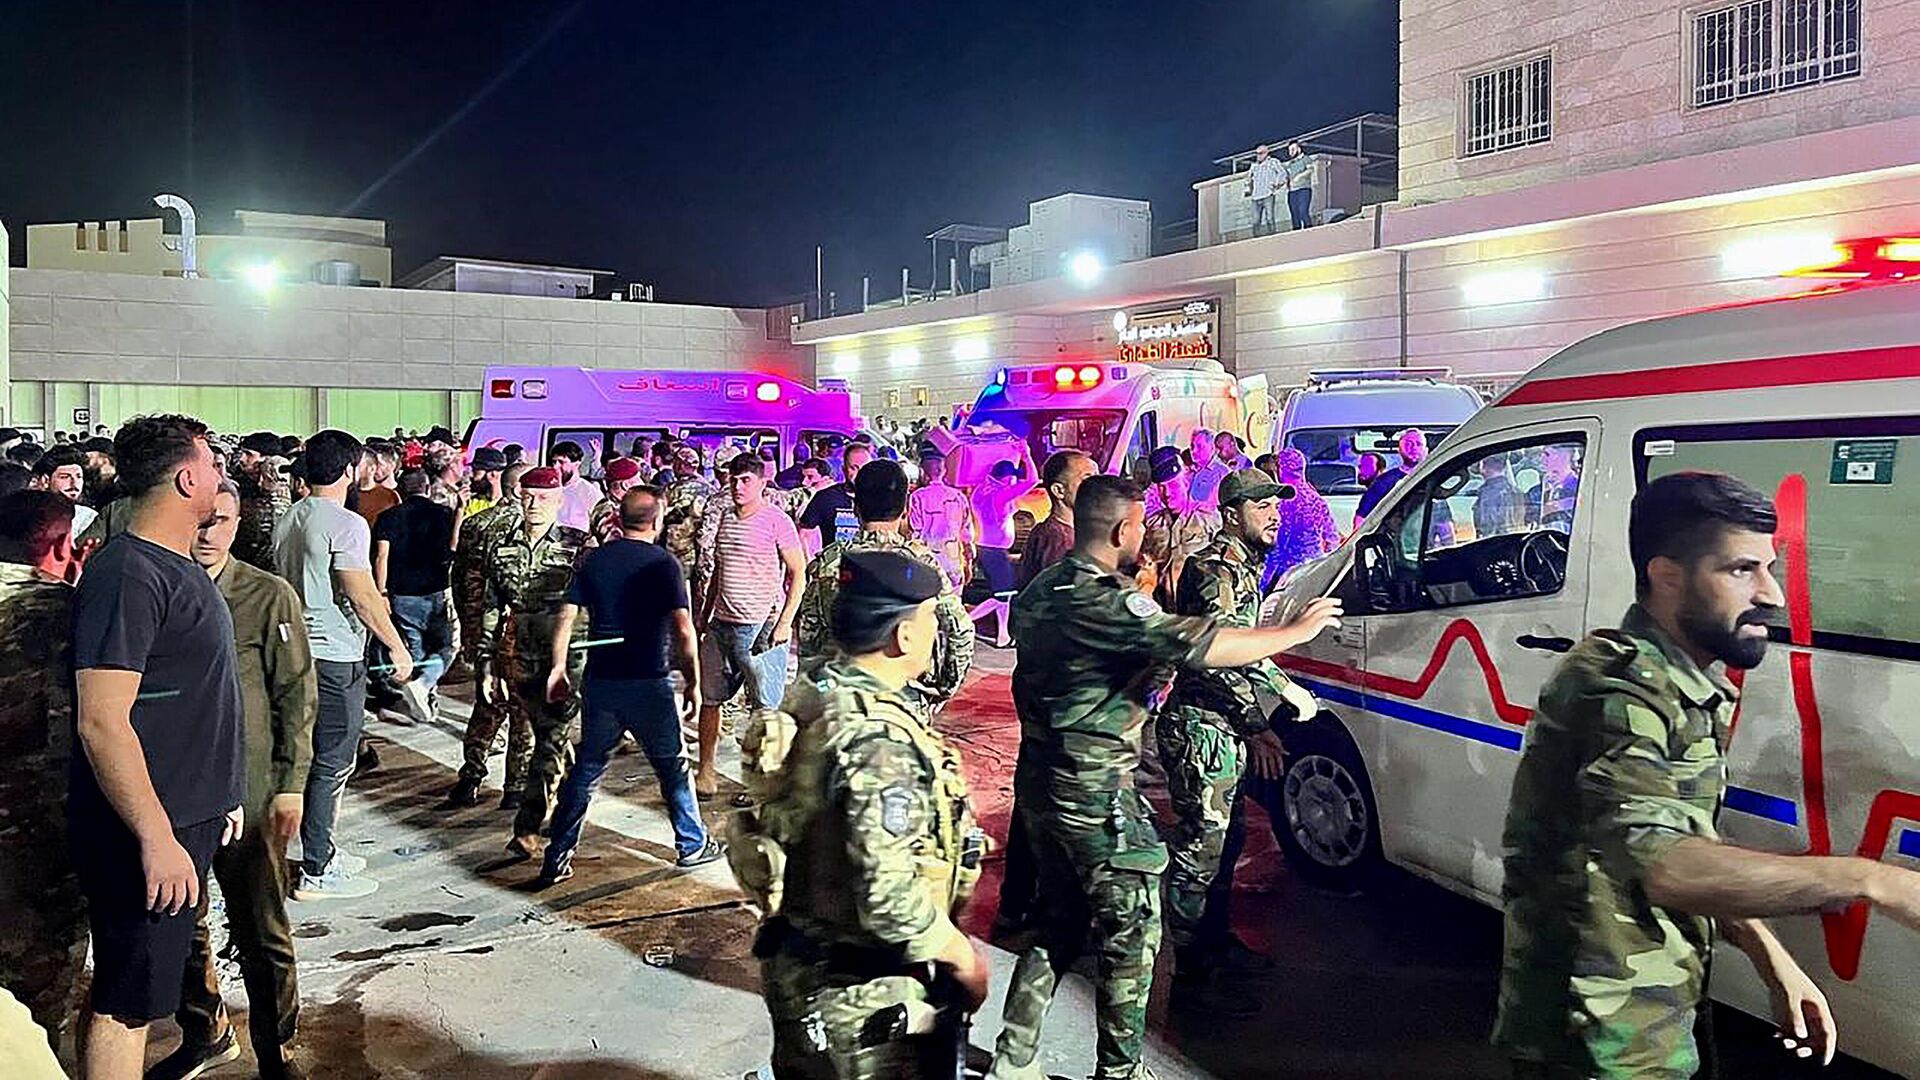 Soldiers and emergency responders gather around ambulances carrying wounded people after a fire broke out during a wedding at an event hall, outside the Hamdaniyah general hospital in Al-Hamdaniyah, Iraq on September 27, 2023. At least 100 people were killed and more than 150 injured when a fire broke out during a wedding at an event hall in the northern Iraqi town of Al-Hamdaniyah, according to state media and health officials, on September 27, 2023.  - اسپوتنیک افغانستان  , 1920, 27.09.2023